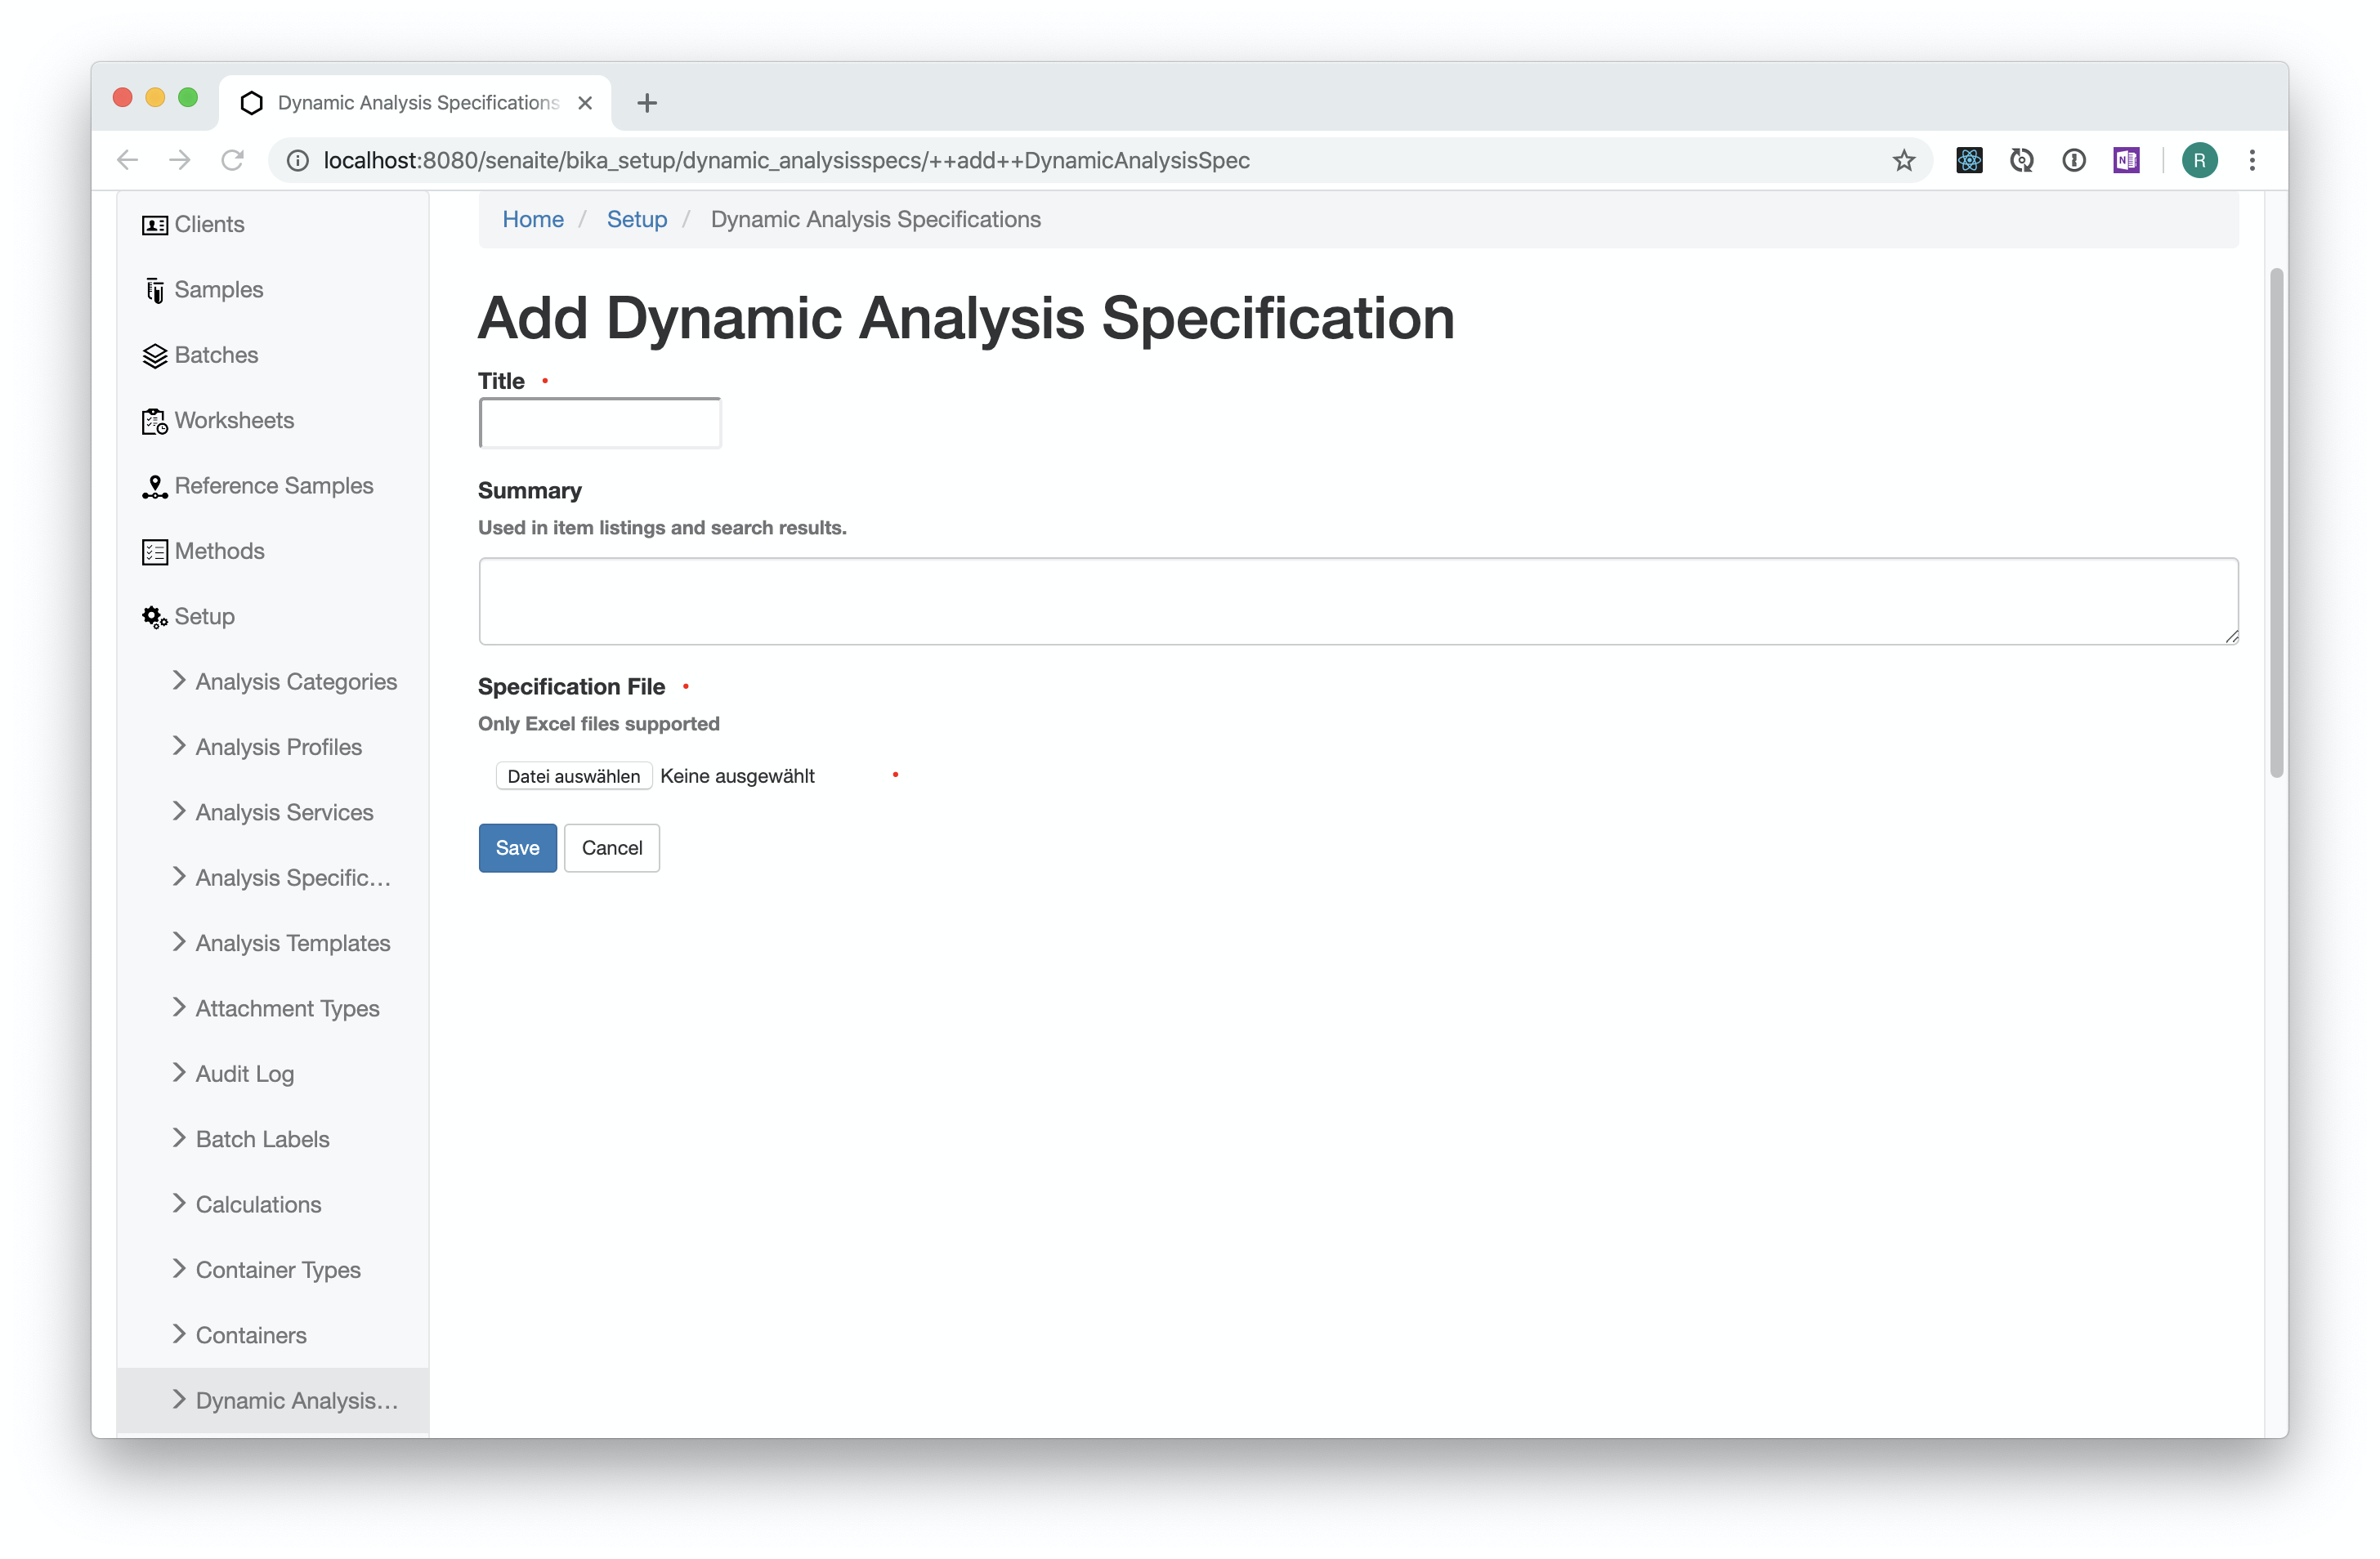 Add Dynamic Analysis Specification